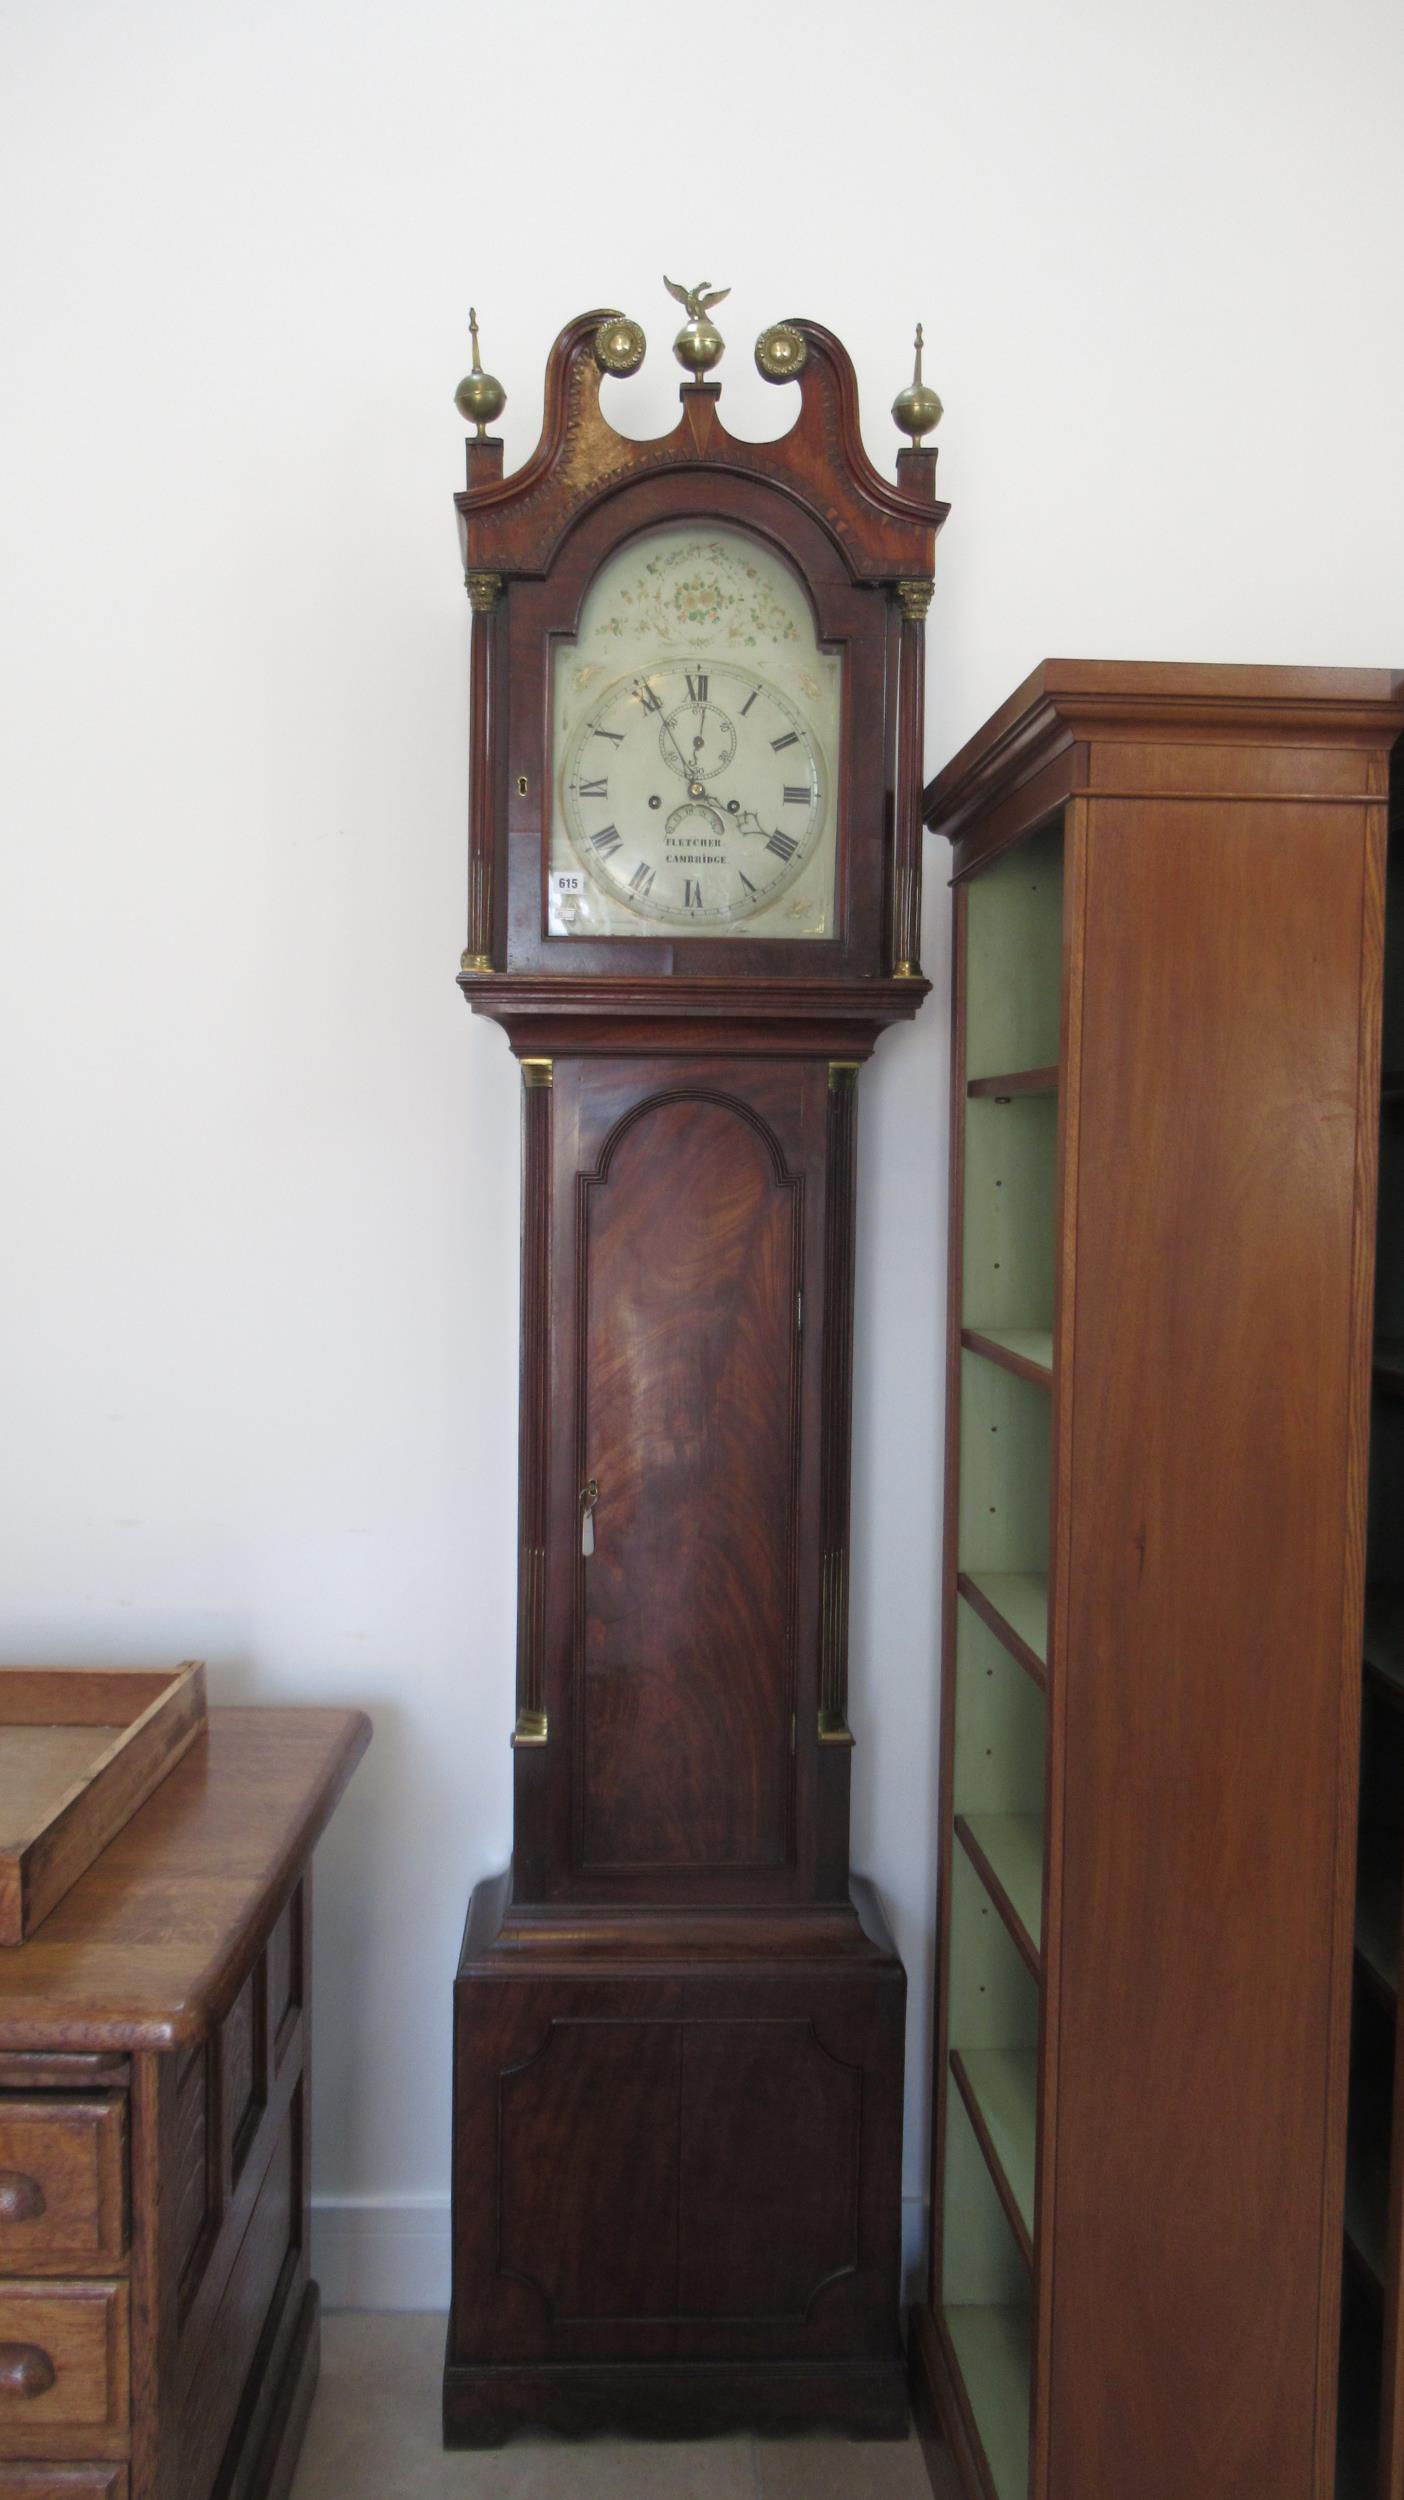 A longcase clock by Fletcher of Cambridge, 8 day movement in a mahogany case, roman numerals and - Image 2 of 2